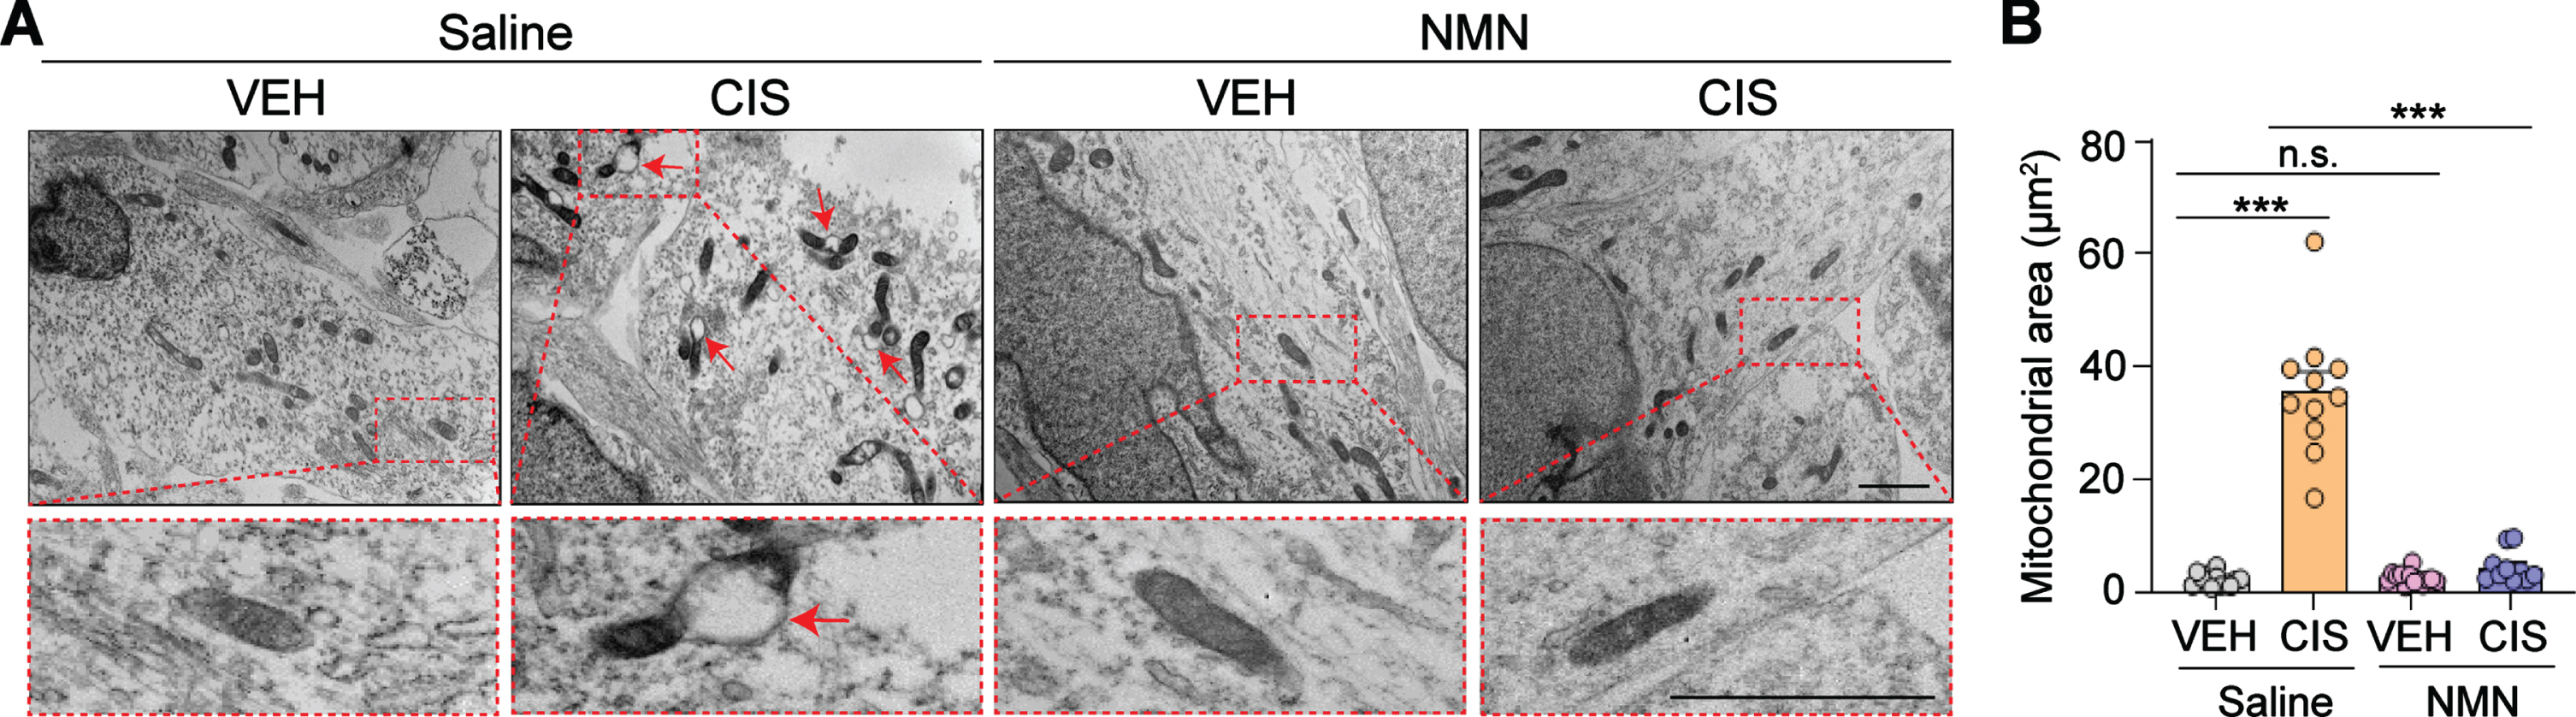 NMN prevents cisplatin-induced increases in mitochondrial vacuolization and swelling in human cortical neurons. (A) Ultrastructural features in mitochondria were observed under transmission electron microscopy. Abnormal areas of mitochondria are indicated with red arrows and show swollen mitochondria by evidence of severely disrupted cristae. Insets outlined by red dashed lines show a more detailed examination of the detrimental effects of cisplatin and the neuroprotective effect of NMN on cisplatin-induced mitochondrial impairments. All scale bars: 2μm. (B) Quantification of mitochondria area in each treatment group was analyzed by Image J. Circles in bar graphs represent analysis of an individual mitochondria. n = 10–13 mitochondria/treatment derived from triplicate wells/treatment group. All experiments were performed in two or three independent experiments. Data represent mean±SEM. One-way ANOVA followed by Tukey’s post-hoc corrections. ***: P < 0.001, n.s.: not significant. VEH: Vehicle, CIS: Cisplatin, NMN: nicotinamide mononucleotide.